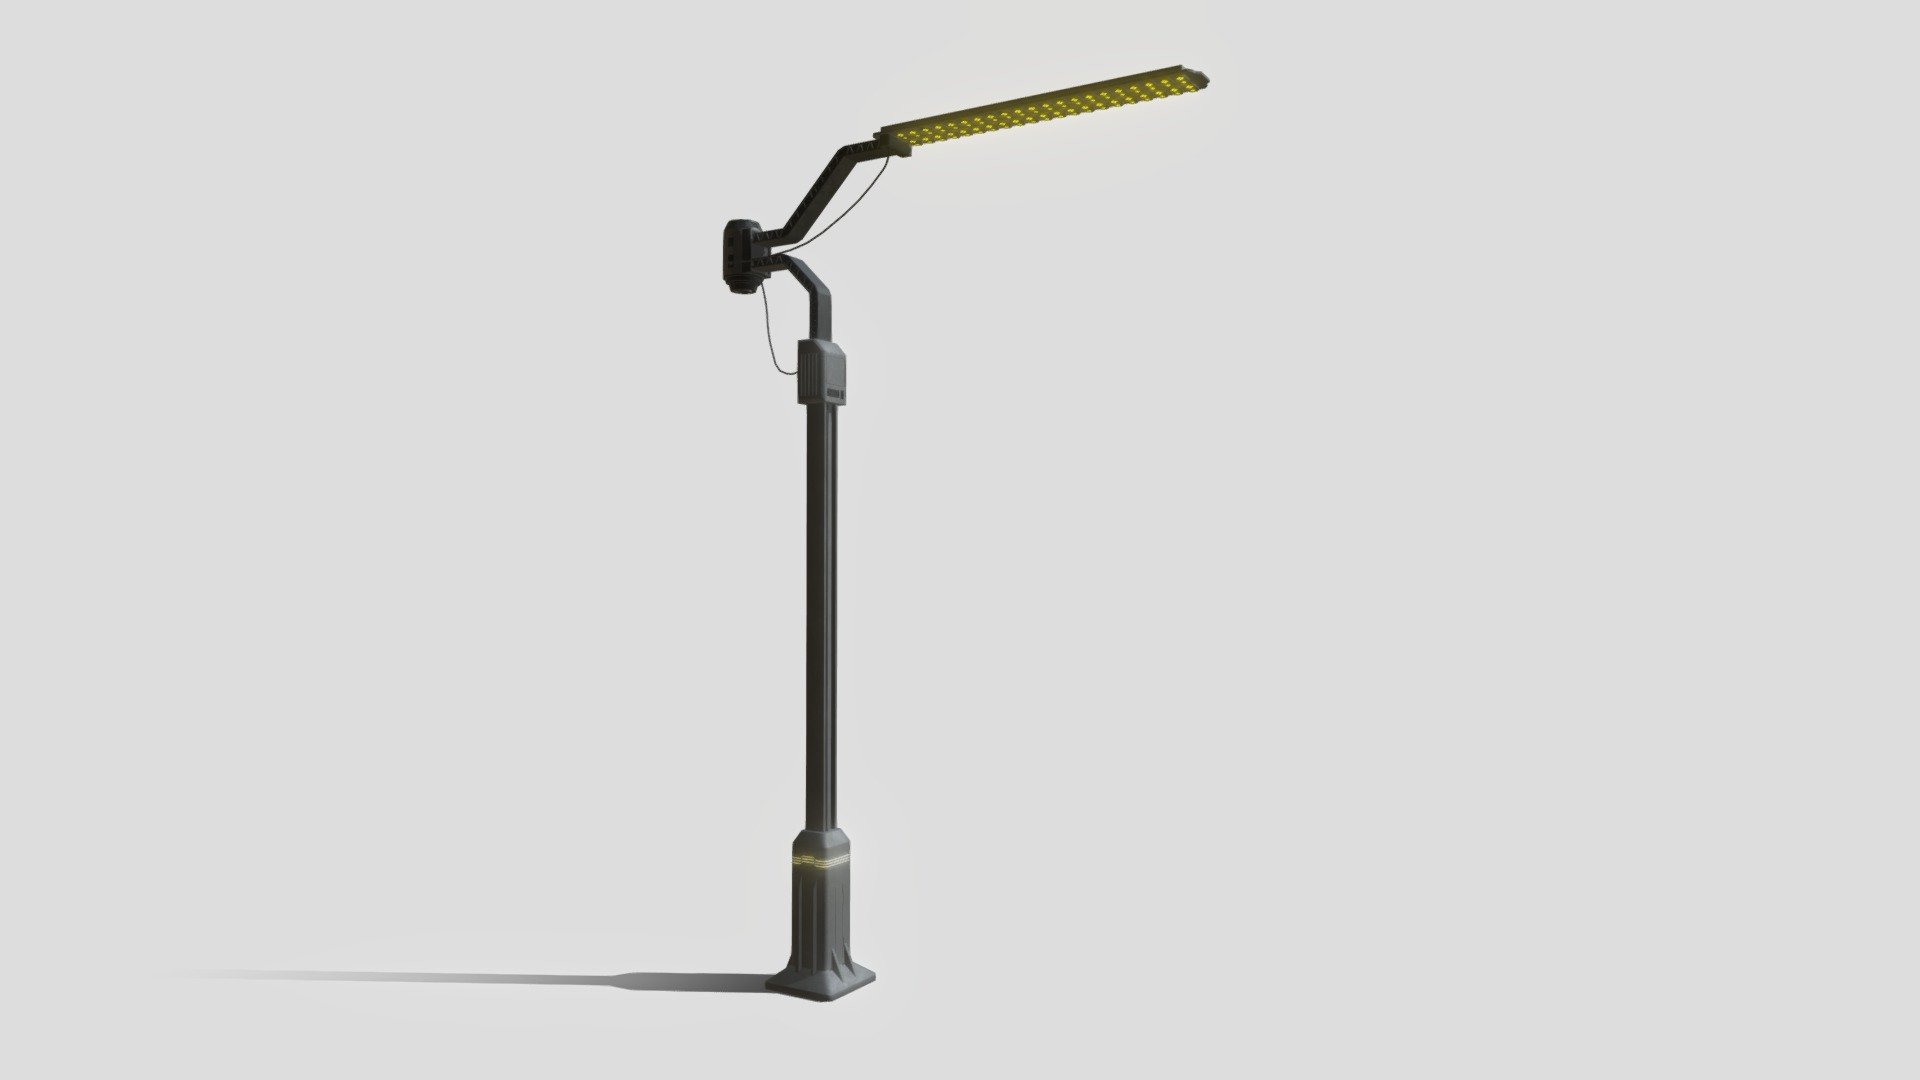 Hi all,

This is PBR Cyberpunk Street Lamp. The file includes a model in real world scale (324cm x 50cm x 514cm).

The product has 52120 polygons.

It comes in the following formats:
.blend
.fbx
.obj
.dae
.gltf

The Blender file has the shaders set up, so it's ready to render using Cycles and Eevee.
It also comes with set of 4K .png maps:
base color
roughness
emission
normal
metallic - Cyberpunk Street Lamp - Buy Royalty Free 3D model by kambur 3d model